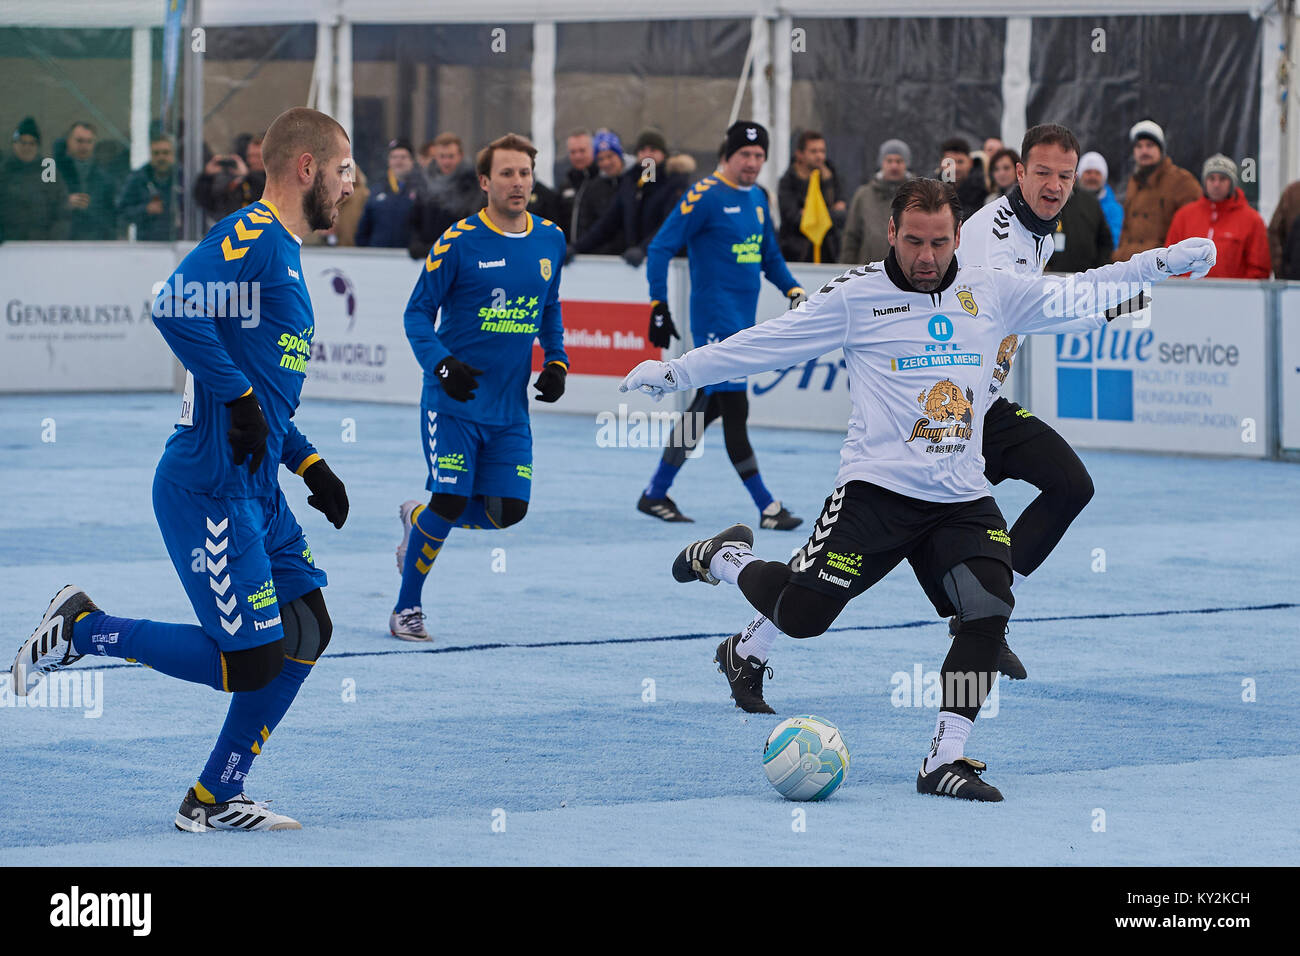 Arosa, Switzerland. 12th Jan, 2018. Ulf Kirsten with a shot during the 8th  unofficial Ice Snow Football World Cup 2018 in Arosa. Credit: Rolf  Simeon/Proclaim/Alamy Live News Stock Photo - Alamy